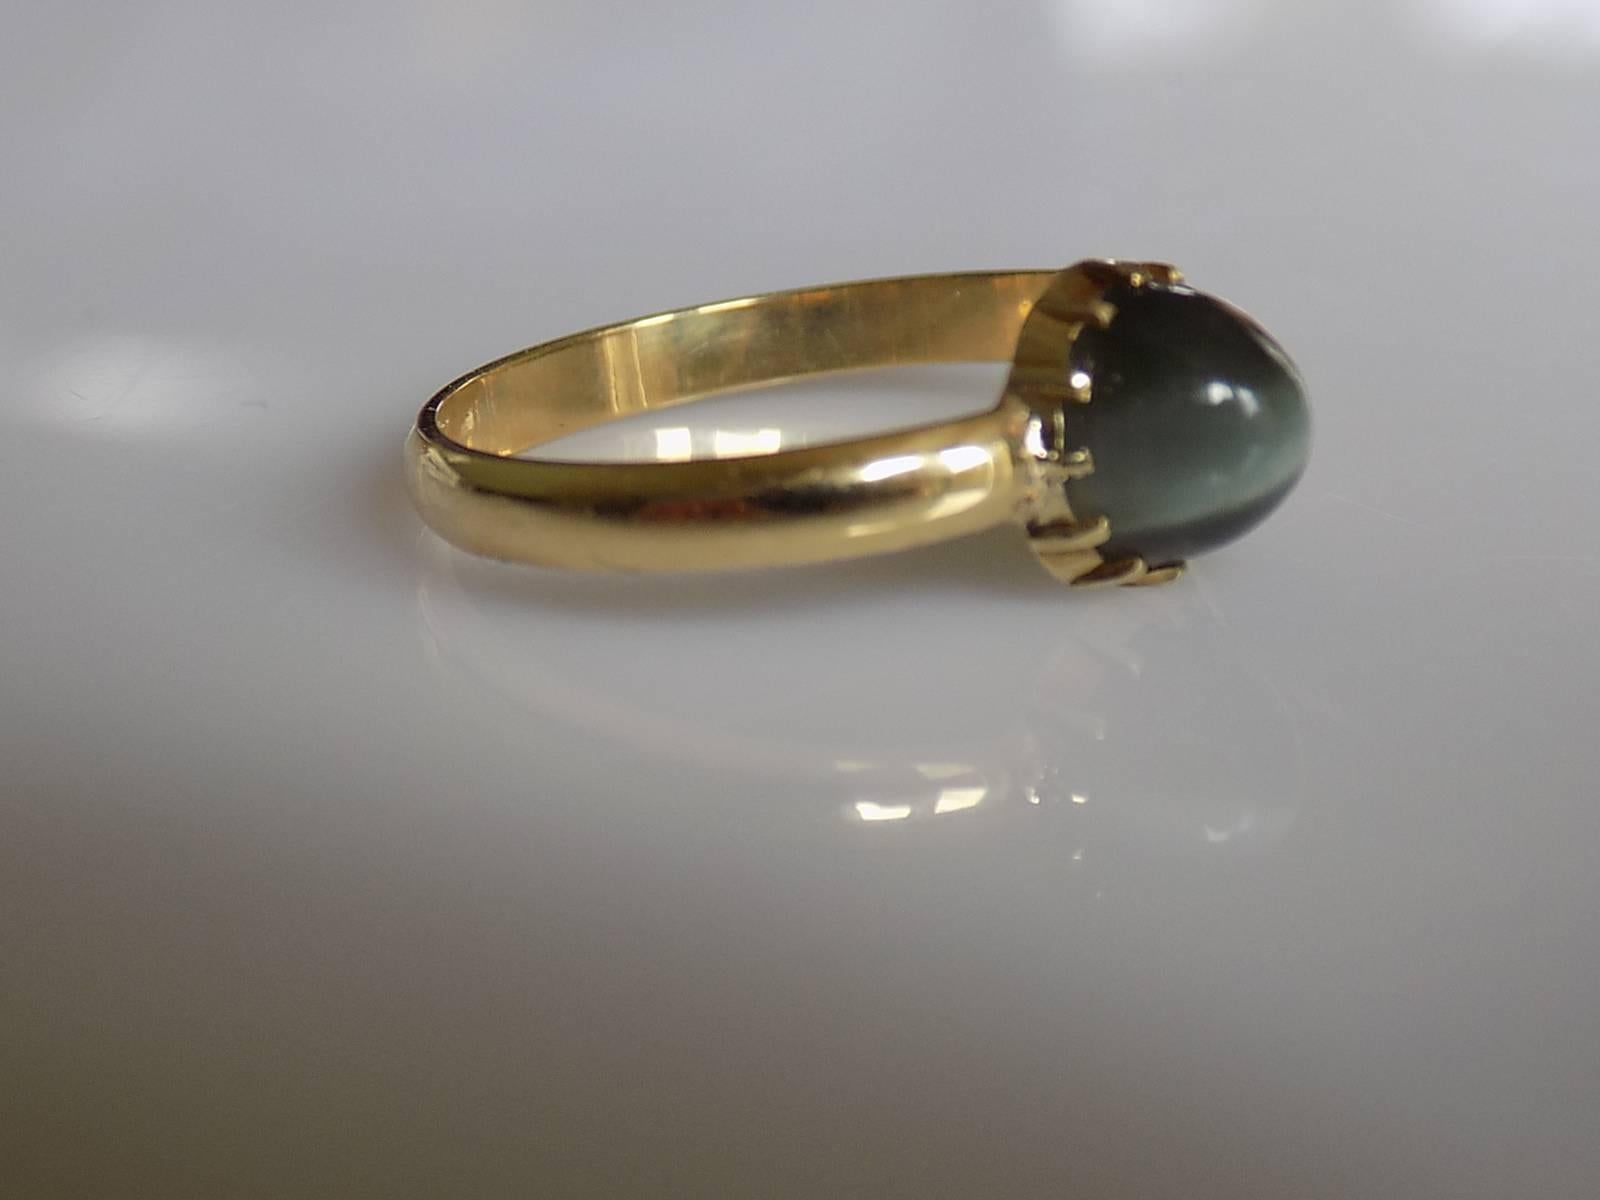 A Lovely Victorian c.1880s Cat`s Eye Chrysoberyl cabochon solitaire ring on later 18 carat Gold shank. English origin.
Size R UK, 9 US (sizeable).
Height of the face 8mm.
Weight 2.7gr.
Full London hallmark for 18 carat gold.
The ring in very good